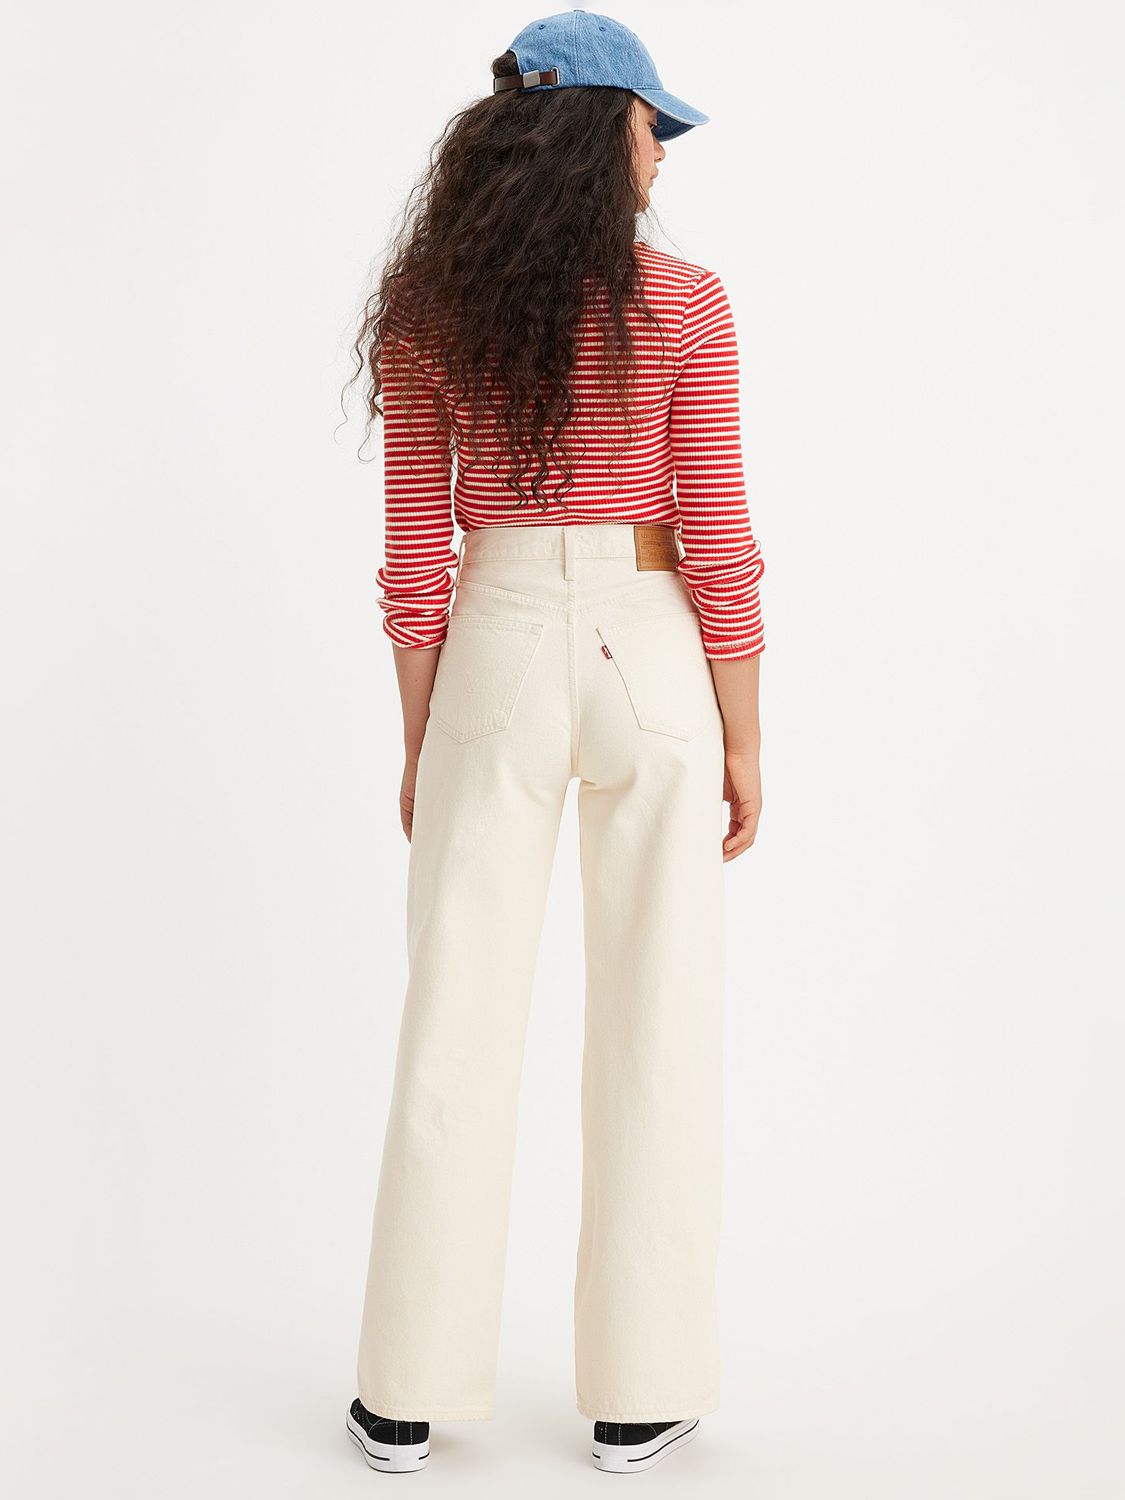 Buy Levi's Ribcage Wide Leg Jeans, Barely Freezing Online at johnlewis.com